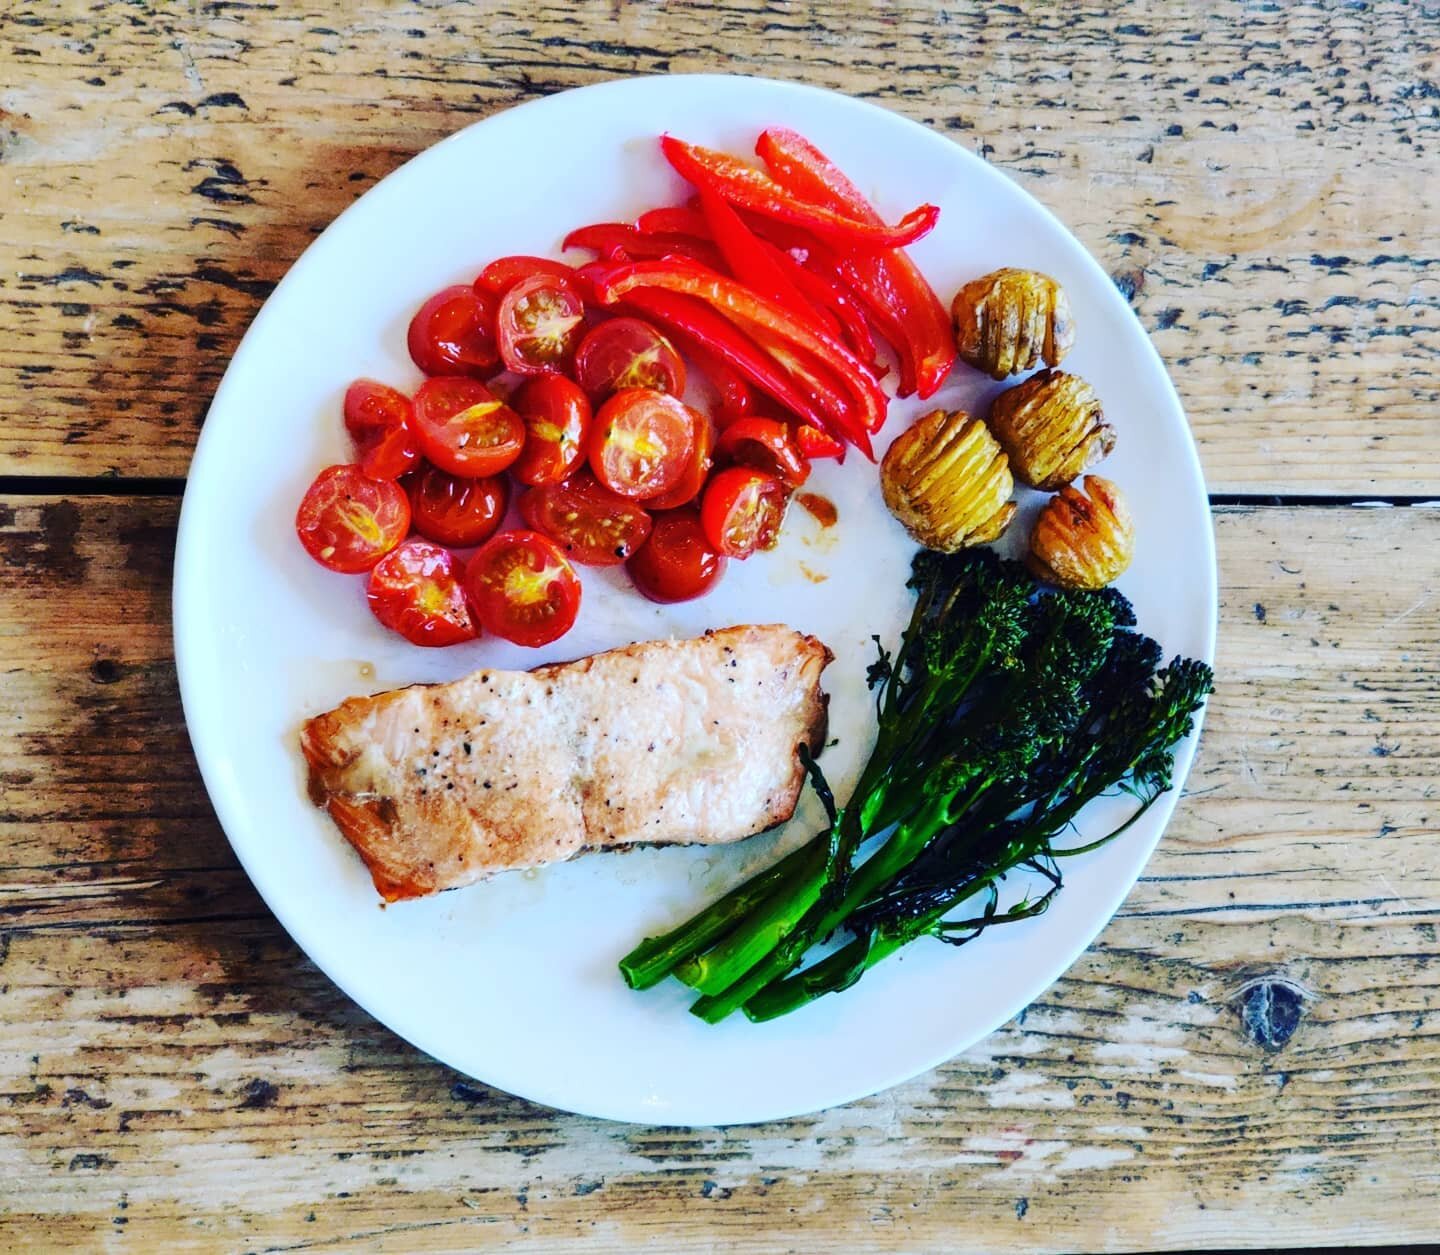 Simple, tasty and nutritious! Oven cooked veg with salmon cooked with soy sauce, ginger, salt, pepper and garlic 😋
#tasty  #cleaneating #salmon #light #pt